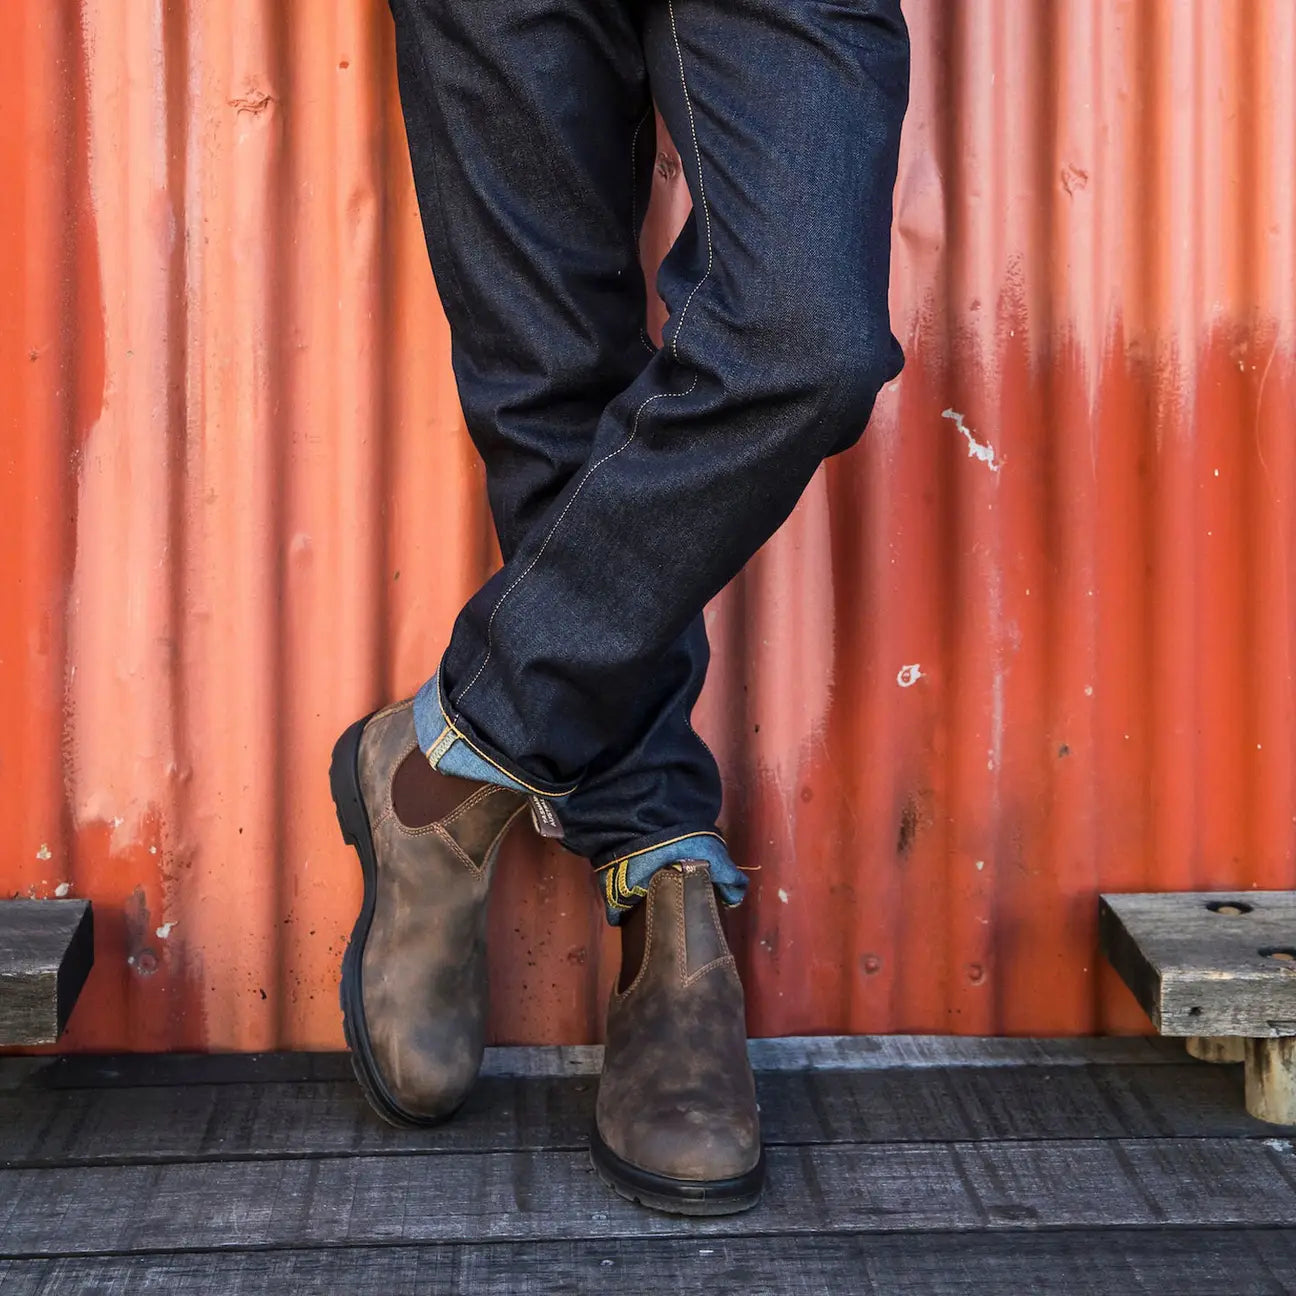 Blundstone 585 Classic Boots